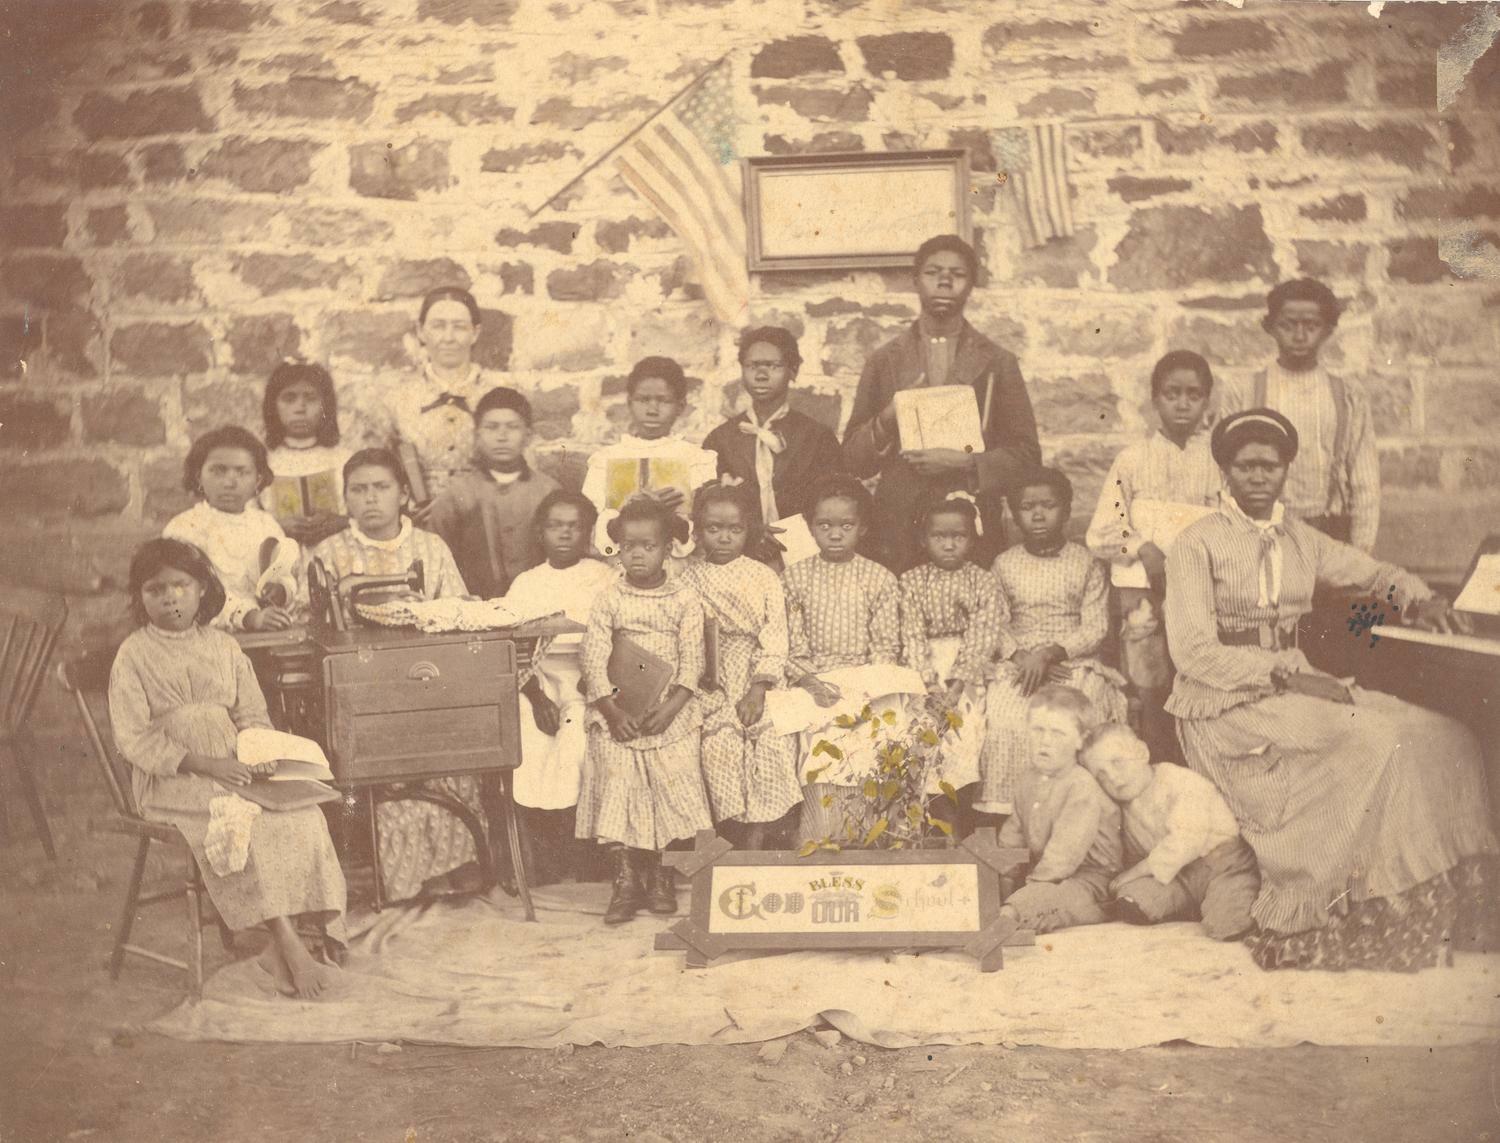 A weathered black-and-white photograph of a group of mostly dark-skinned school children sitting and standing against a brick wall.